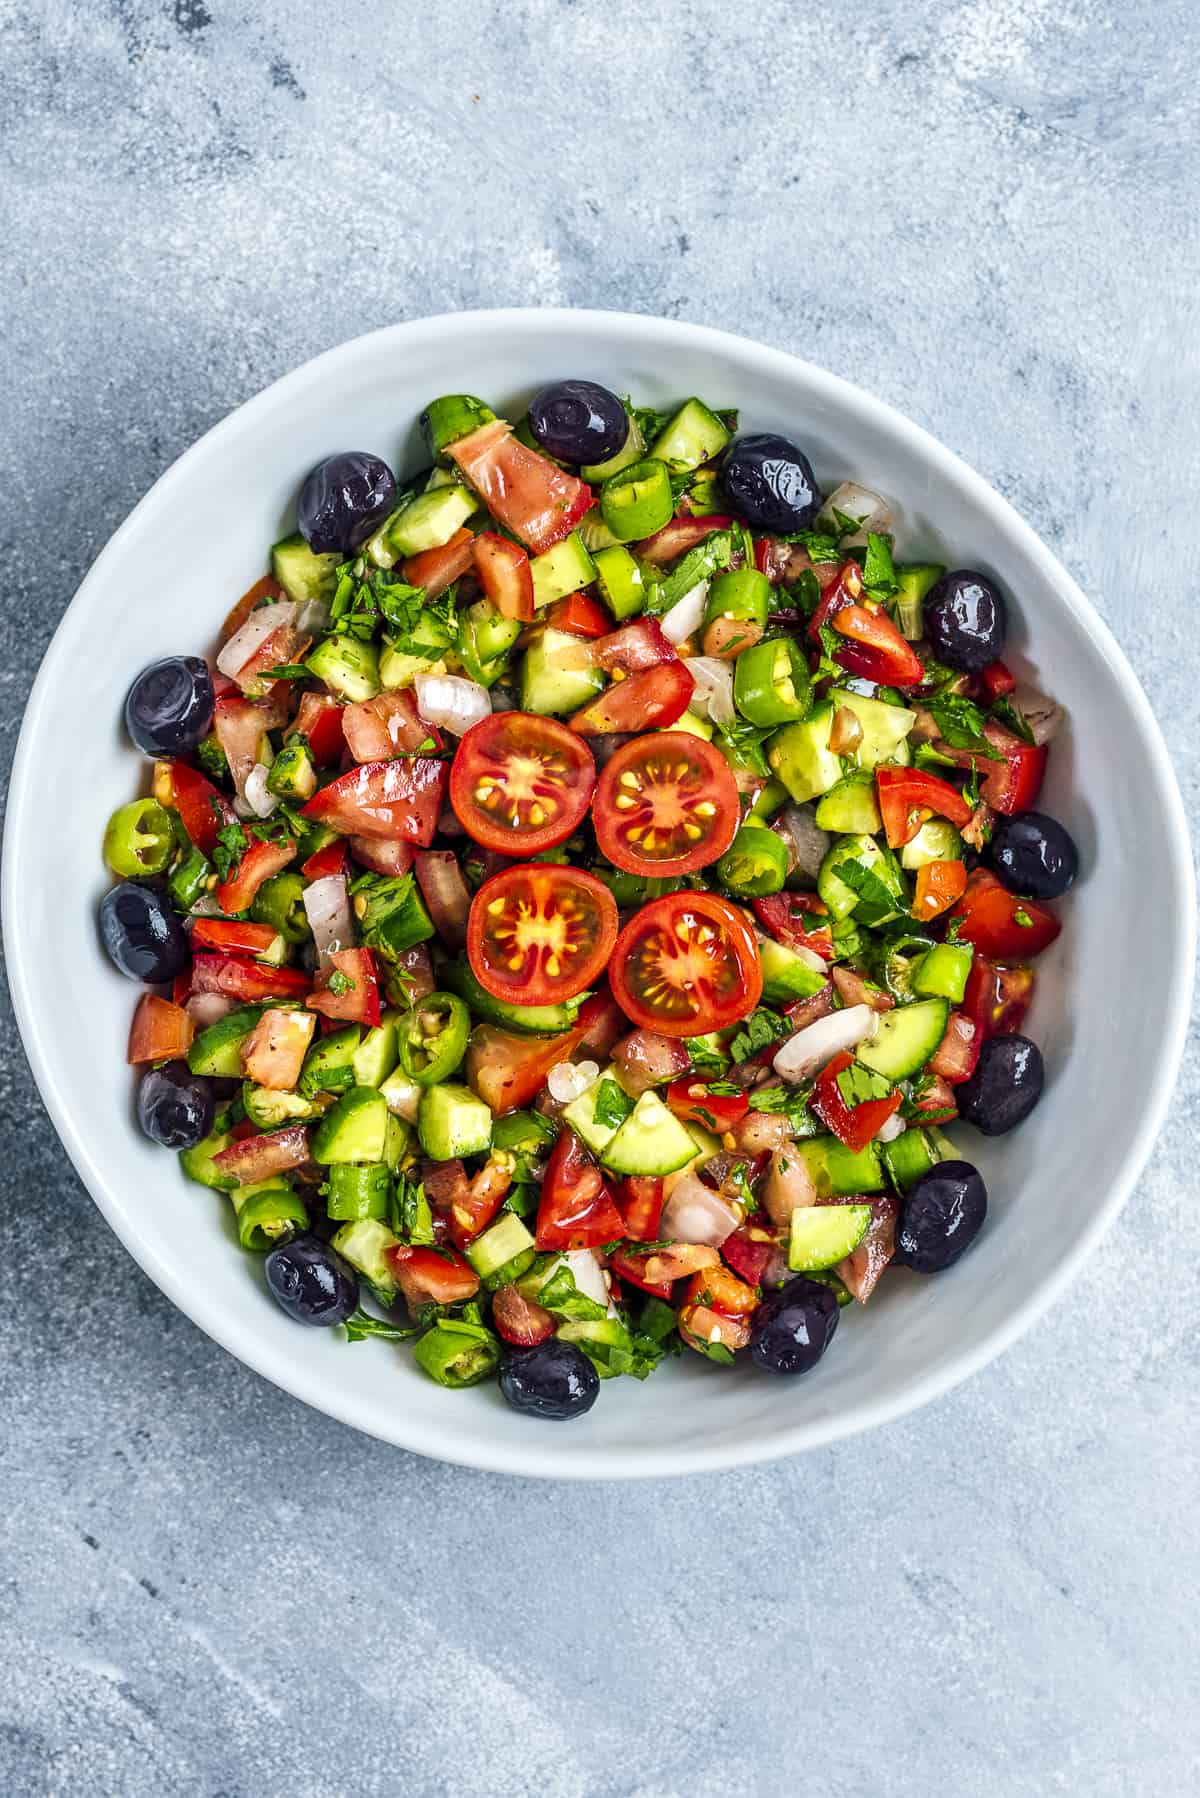 Tomato and cucumber salad garnished with black olives in a white bowl.